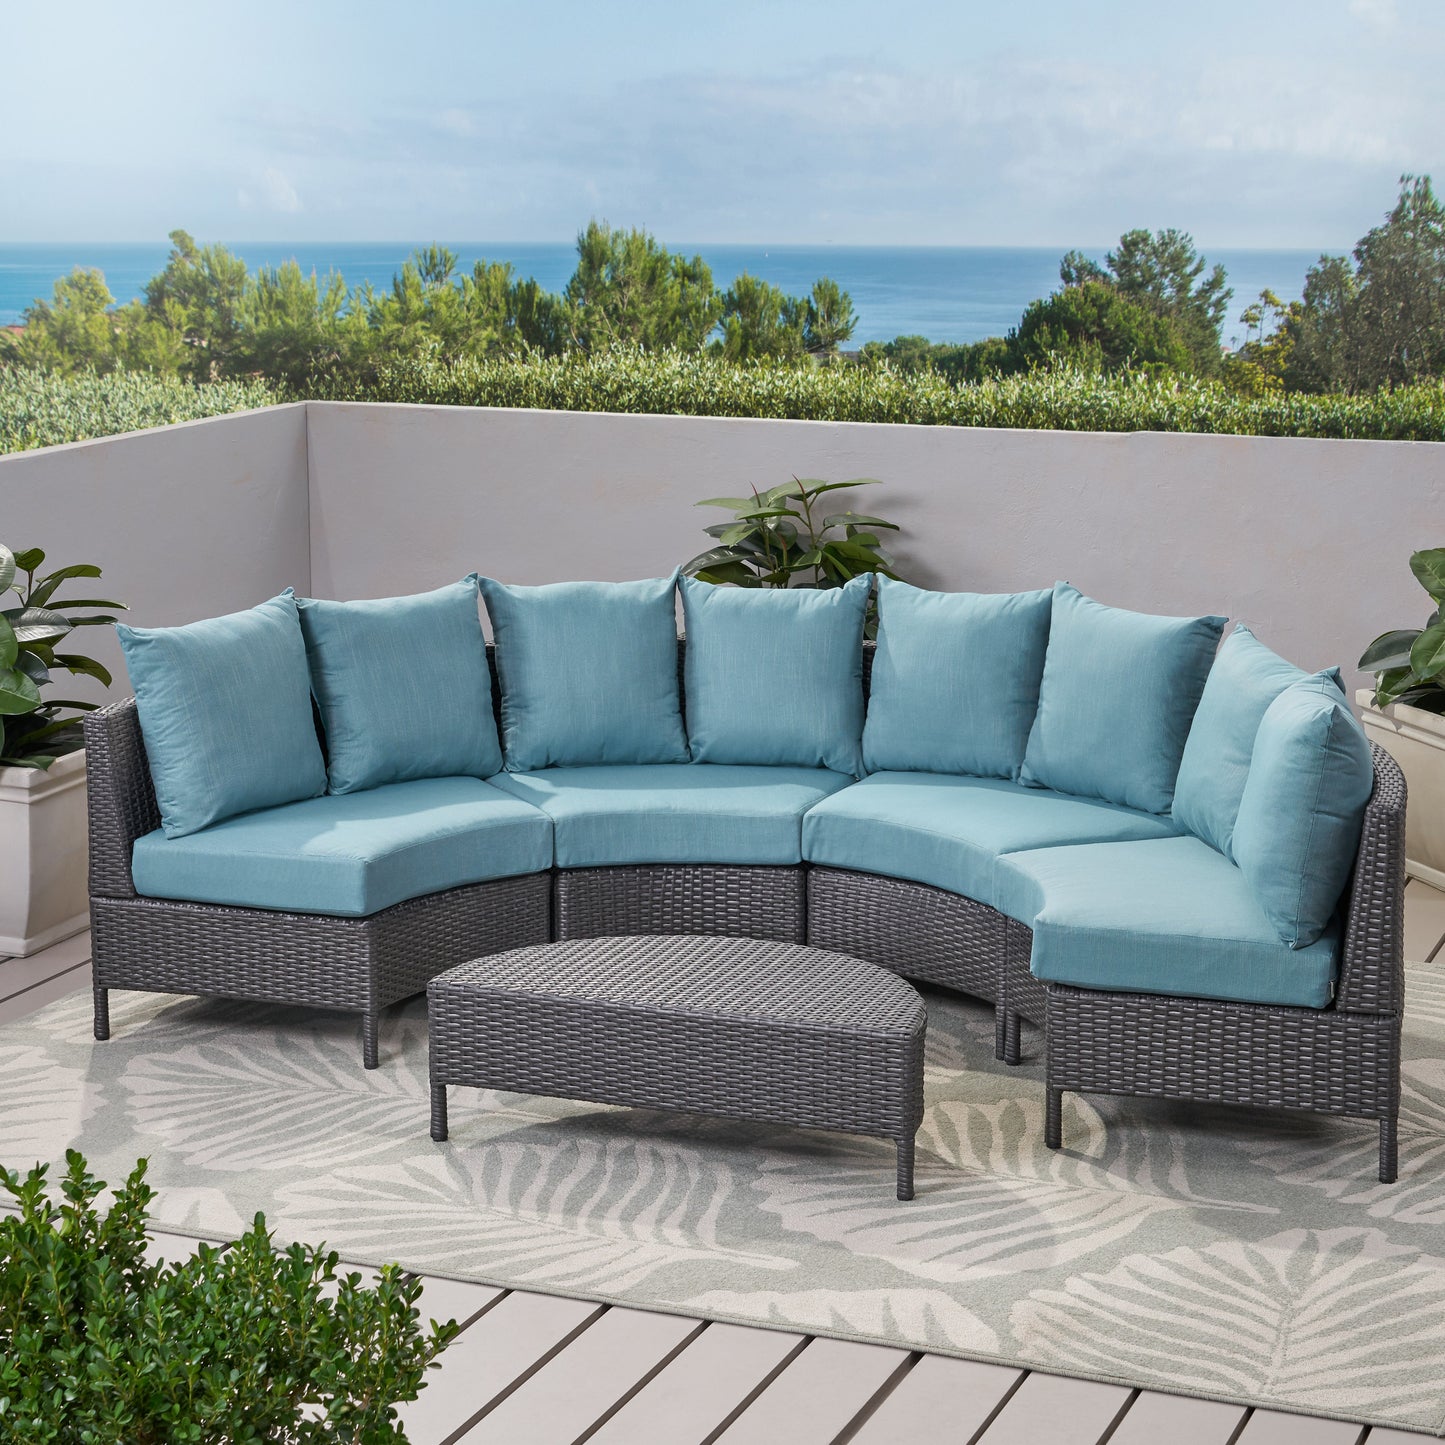 Venice Outdoor 5 Piece Gray Wicker Sectional Sofa Set with Teal Cushions